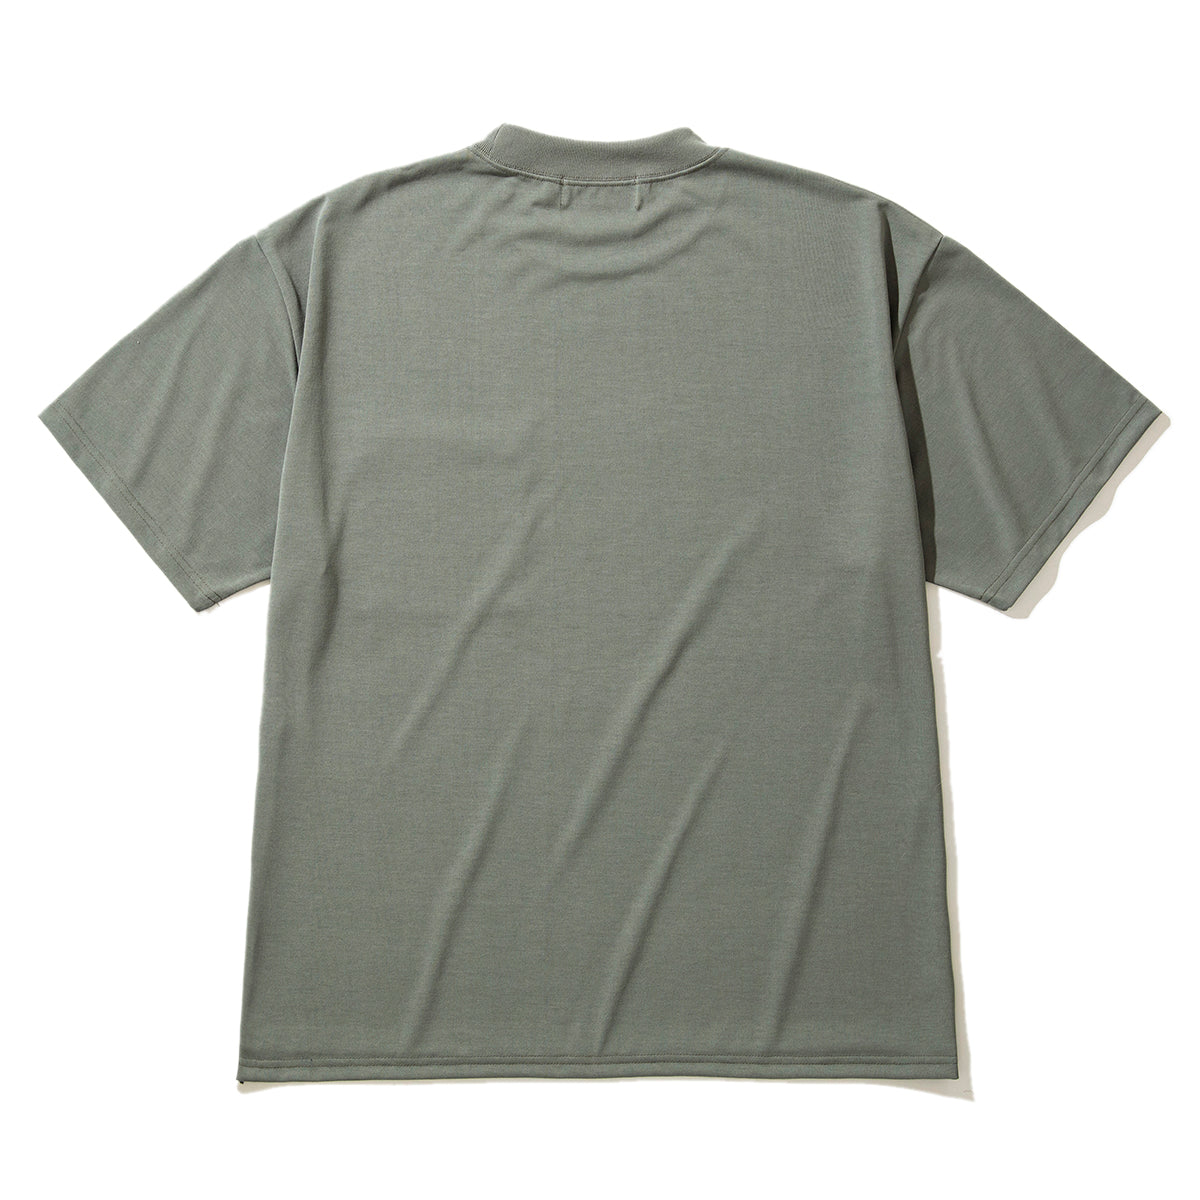 TRY COOL HEAVY WEIGHT POCKET DRY T-SHIRT